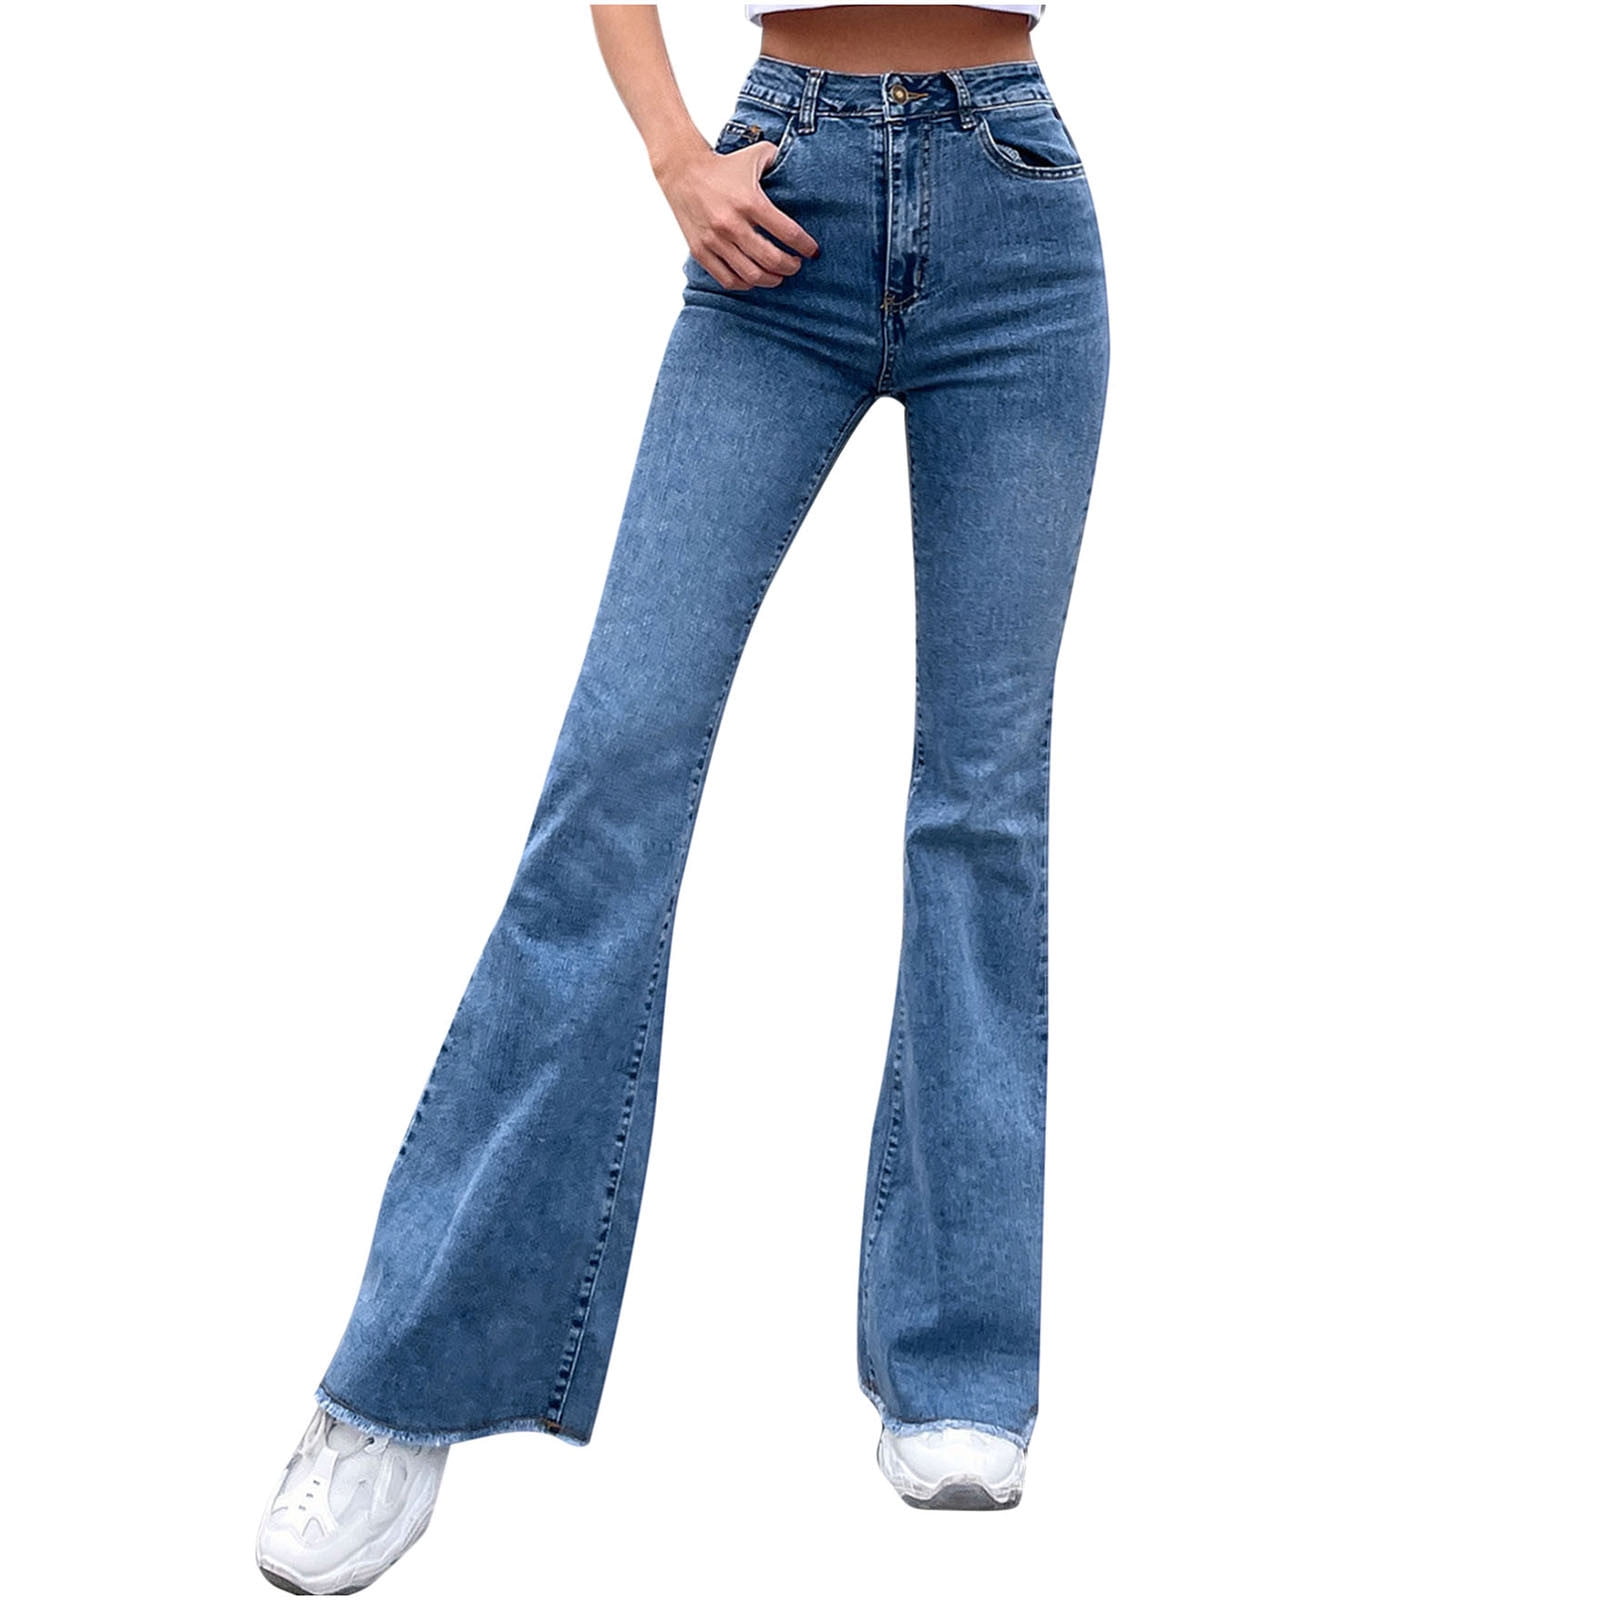 Vintage Style Women Flare Jeans Bell Bottom Stretch Denim Pants Trousers  Chic